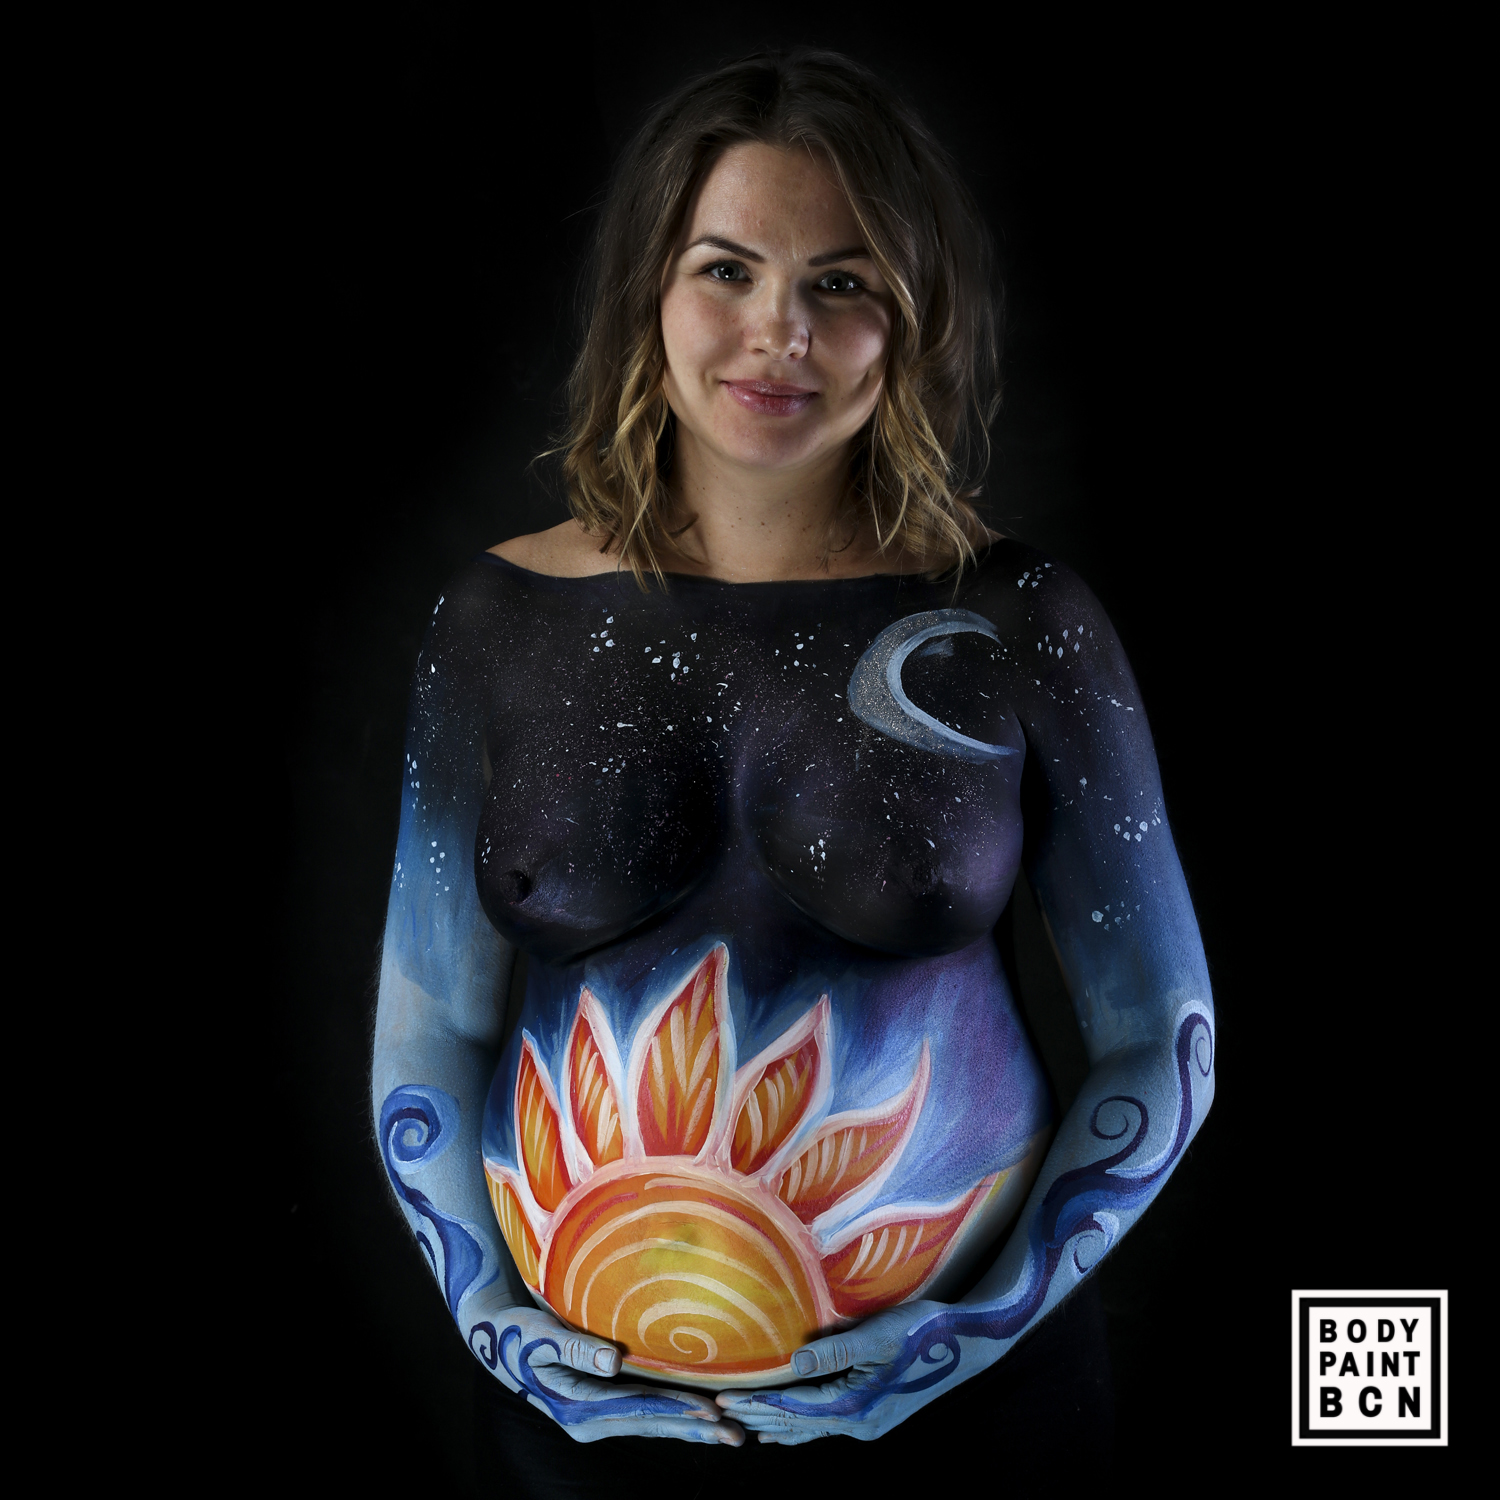 Belly painting with body painting